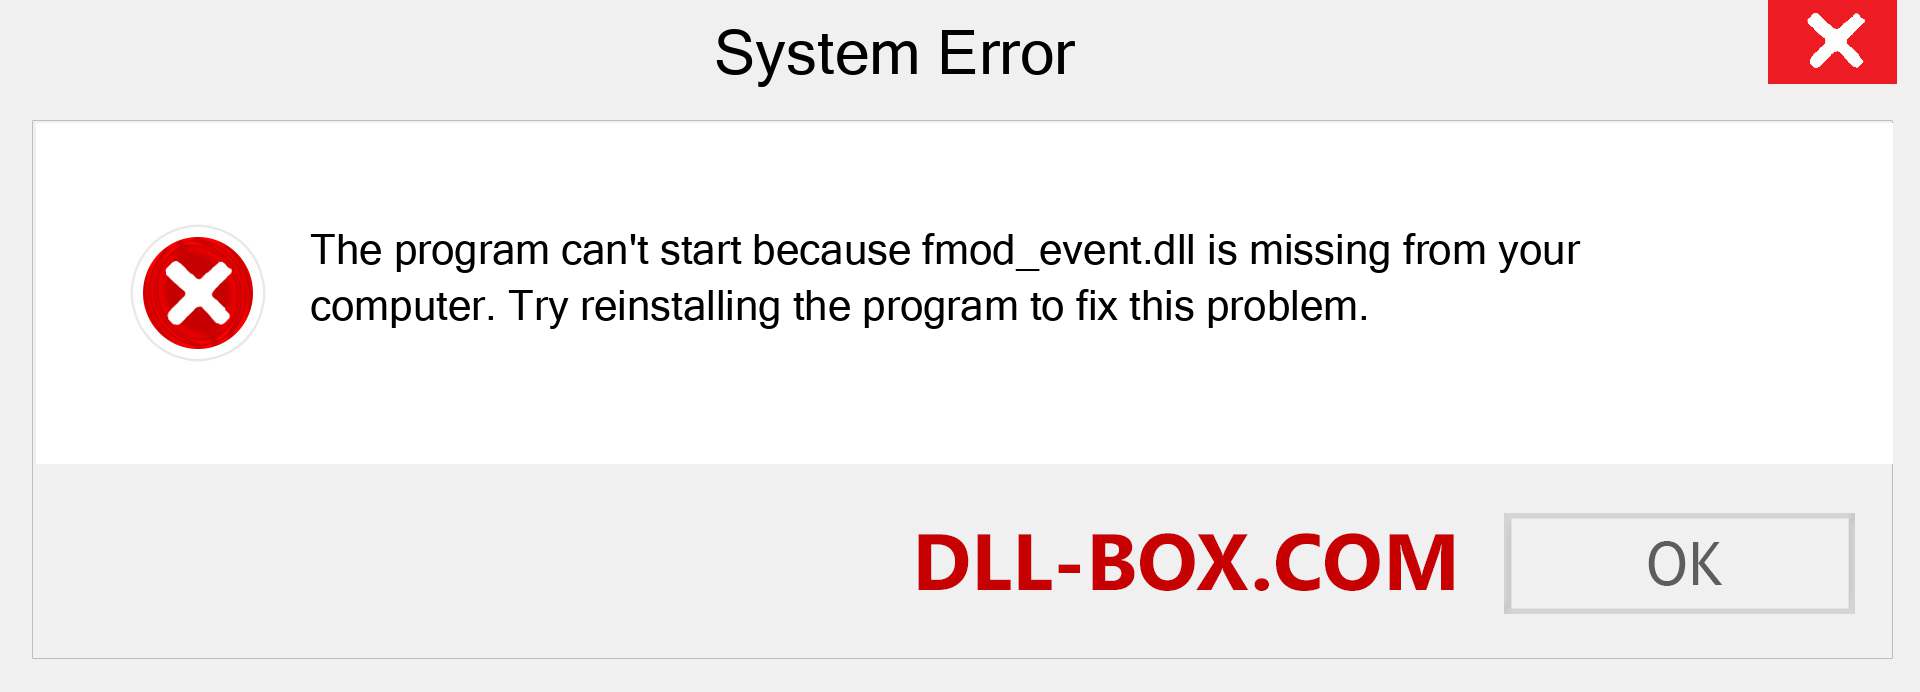  fmod_event.dll file is missing?. Download for Windows 7, 8, 10 - Fix  fmod_event dll Missing Error on Windows, photos, images